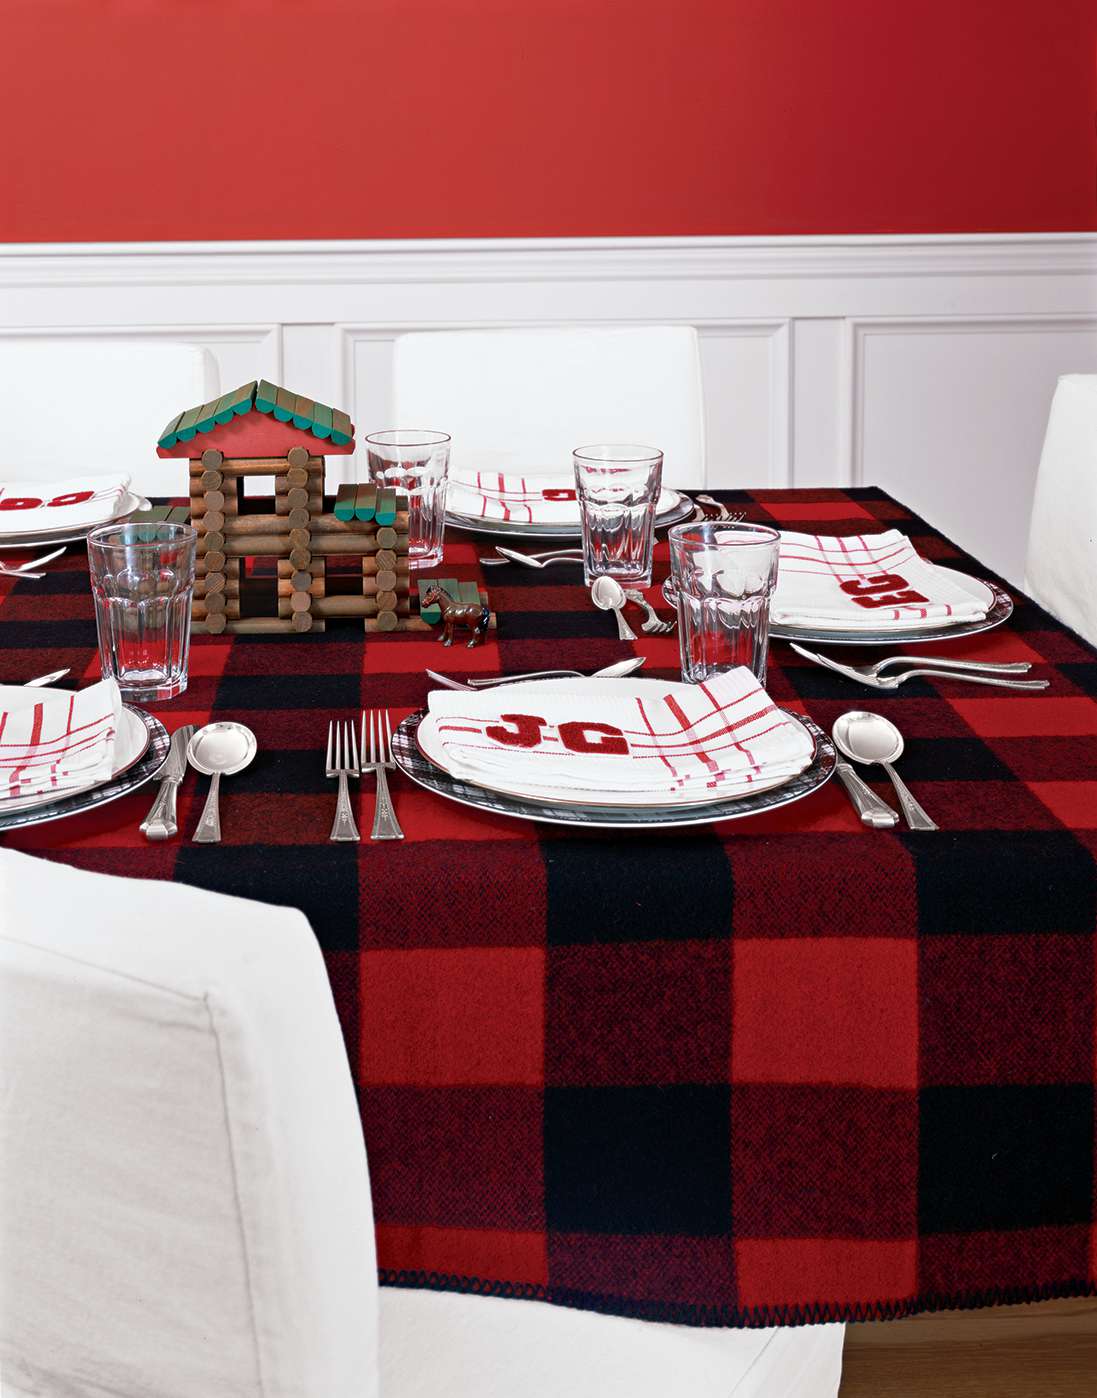 Plaid throw blanket used as a tablecloth